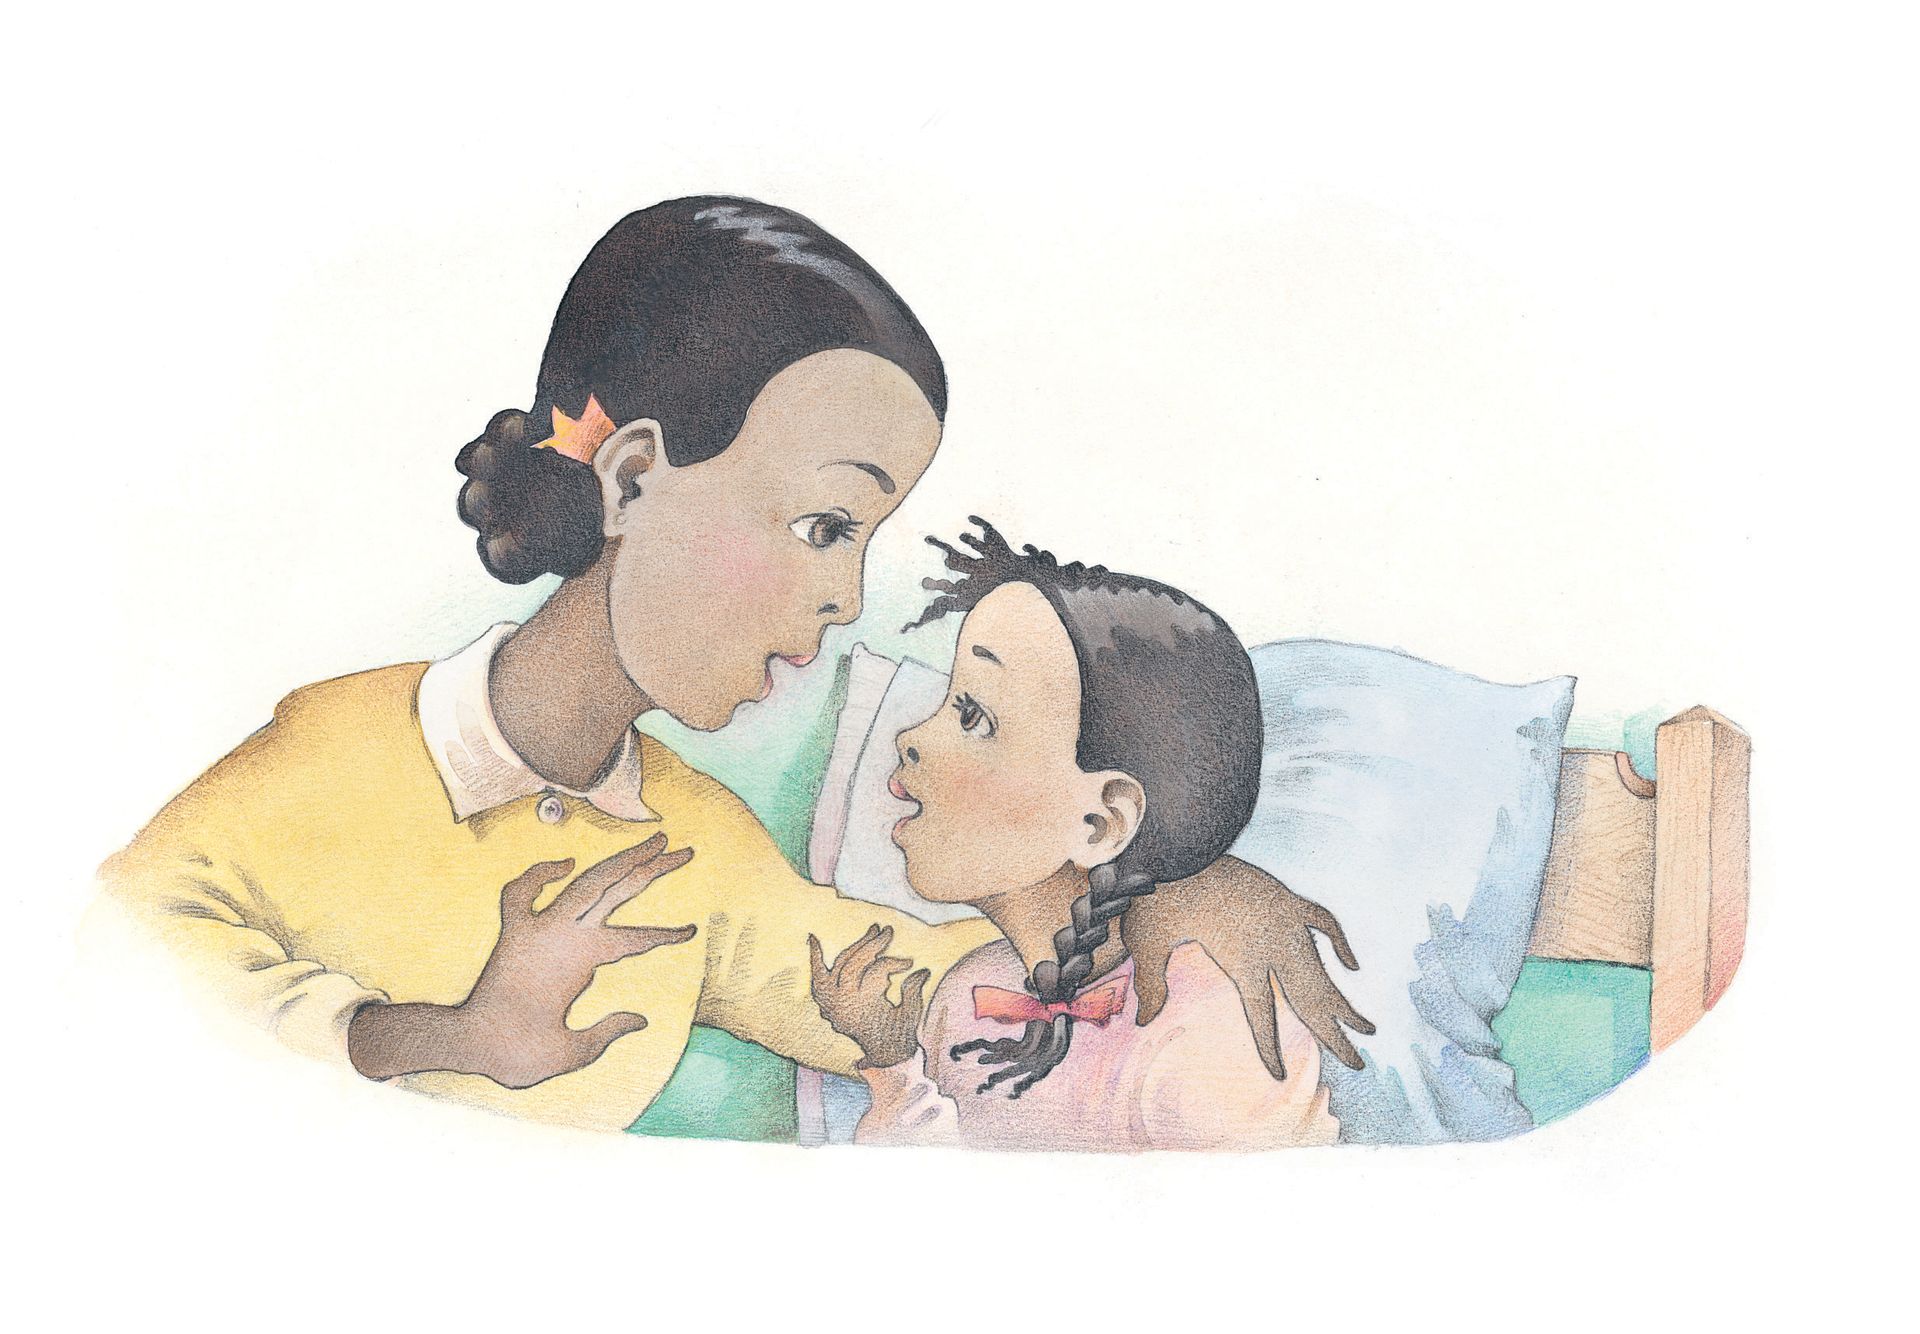 A mother tells a story to her young daughter, who is ready for bed. From the Children’s Songbook, page 204, “Mother, Tell Me the Story”; watercolor illustration by Richard Hull.